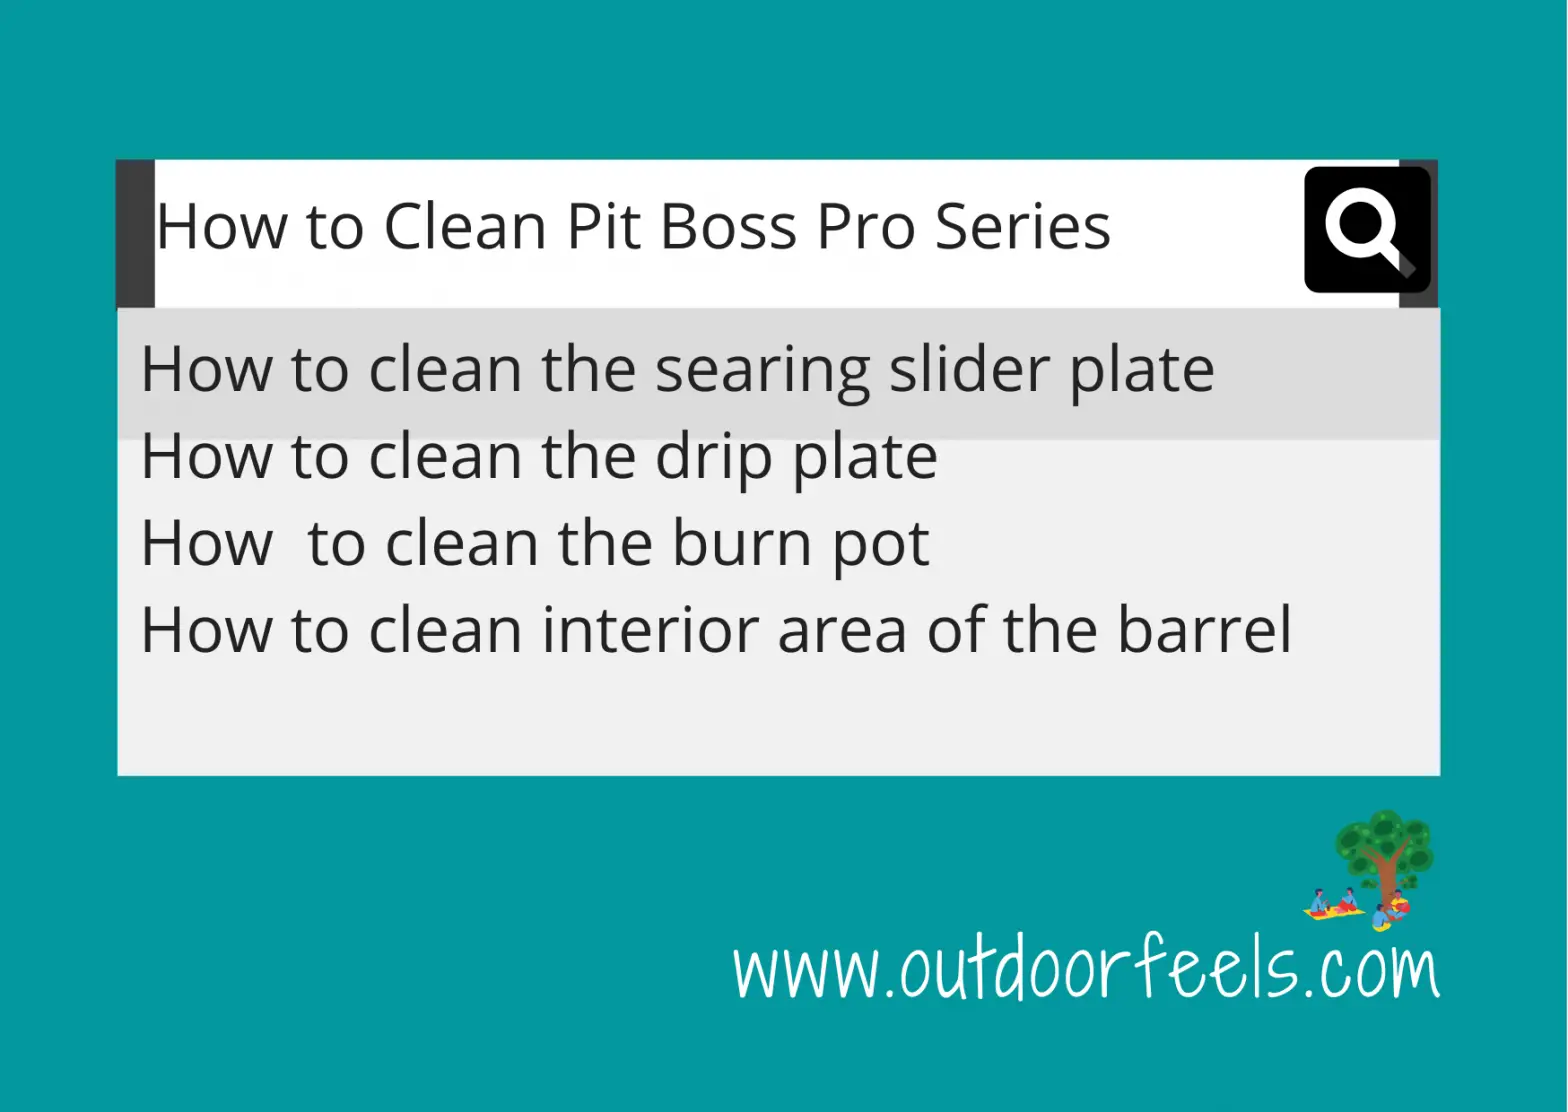 How to Clean Pit Boss Pro Series